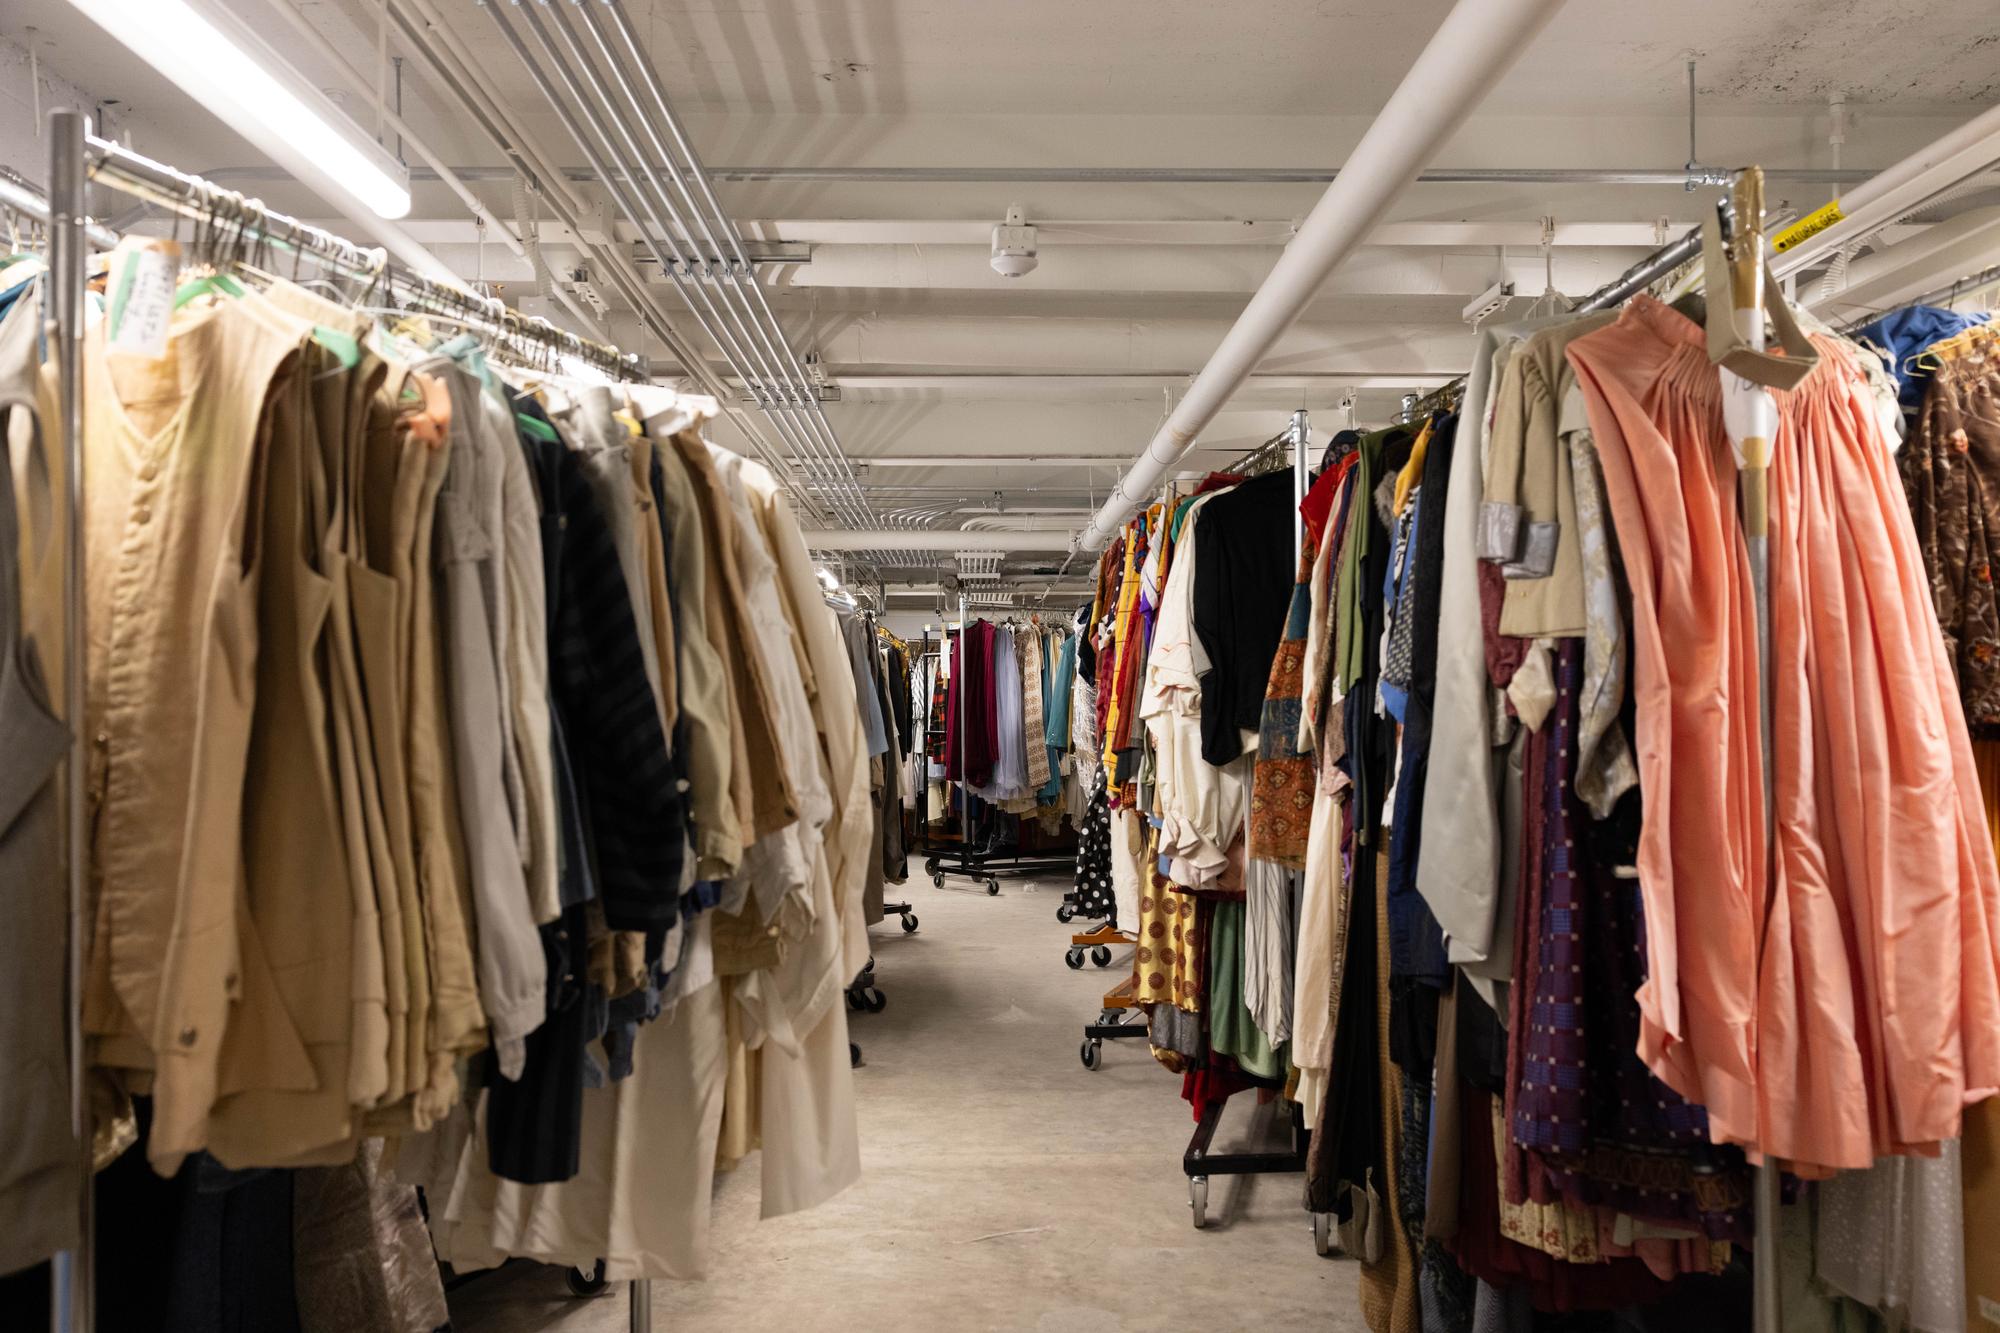 Rows of costumes in the costume department